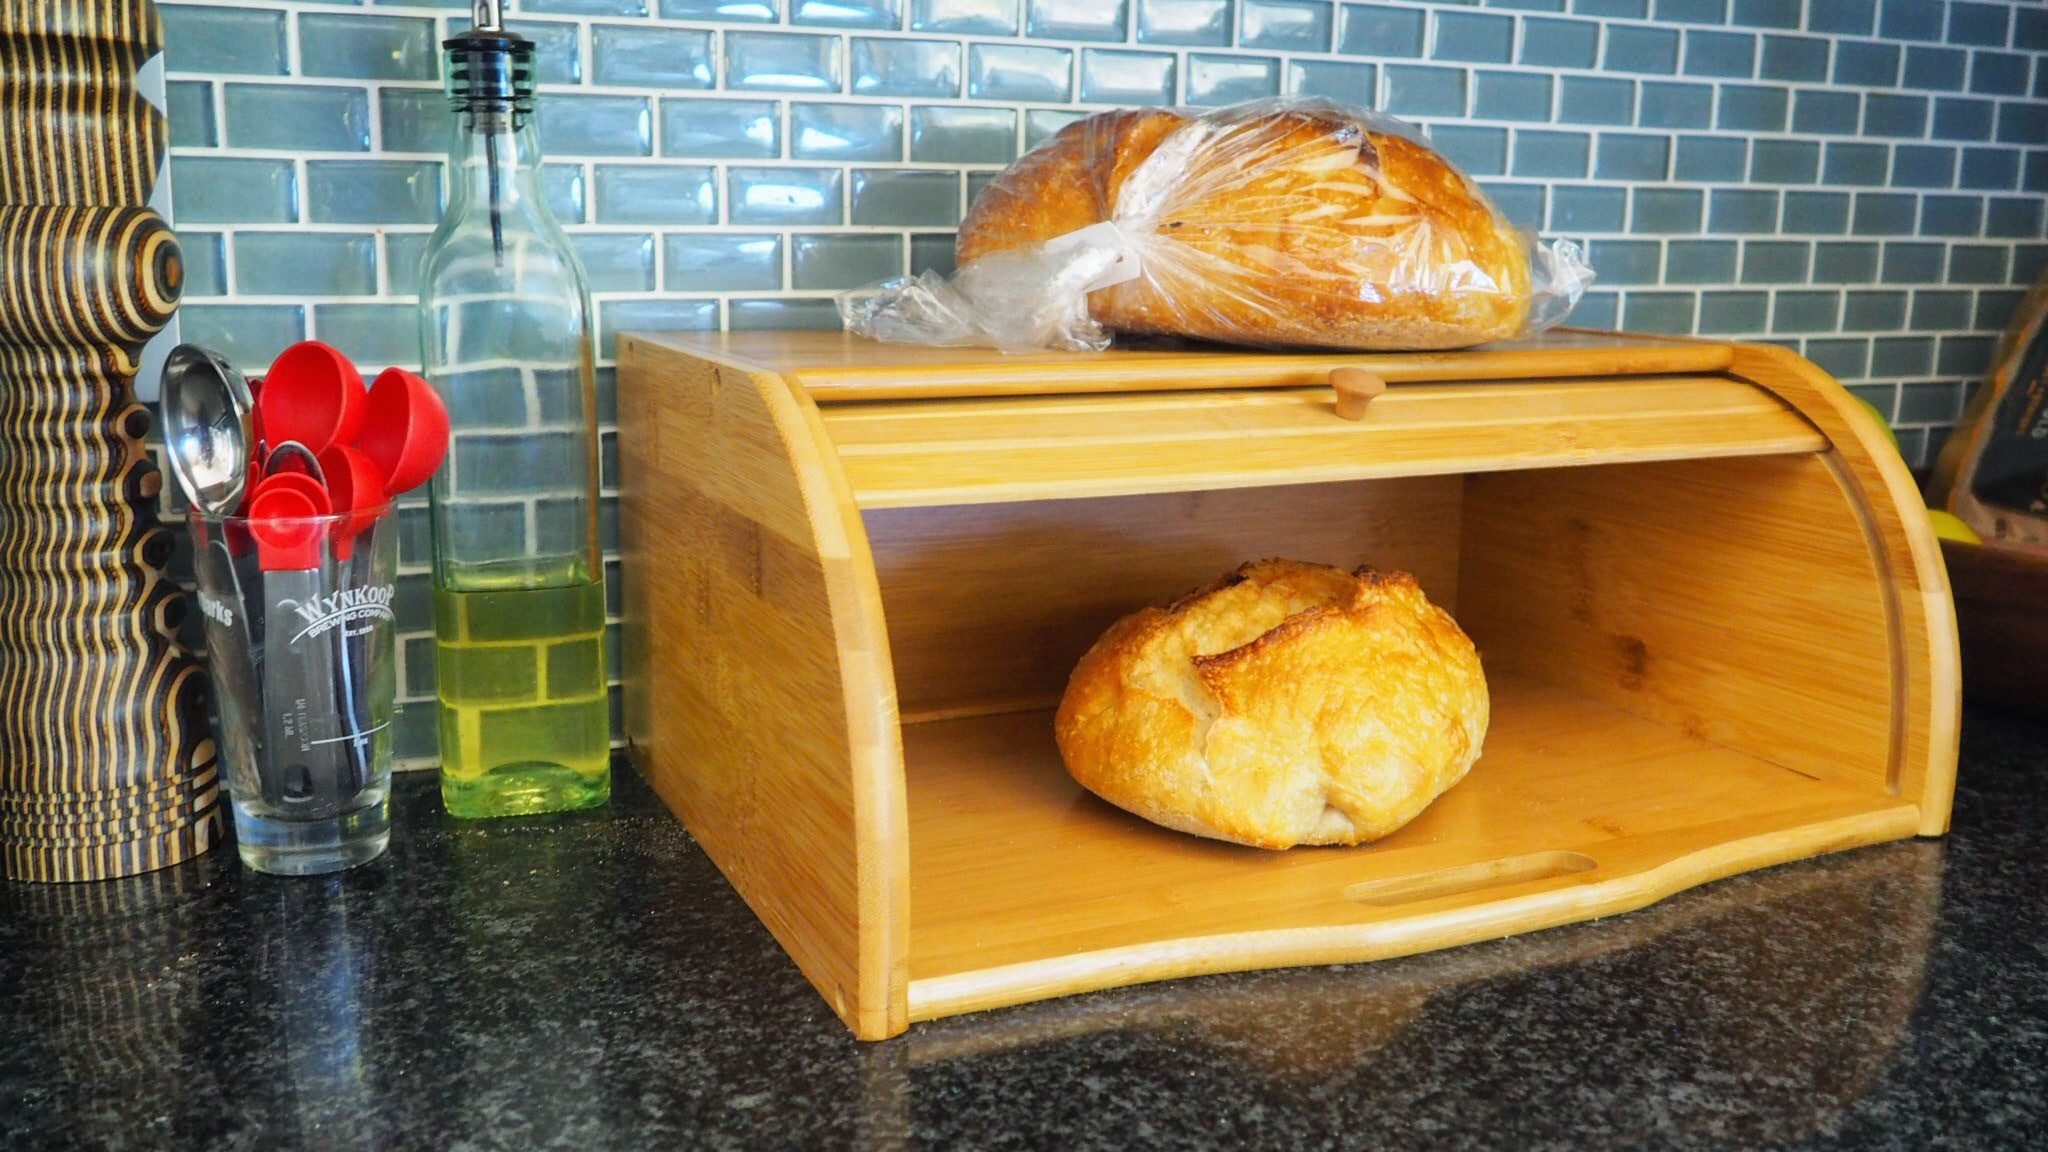 Bread Box Loaf Storage Keeper Cake Container Airtight Saver